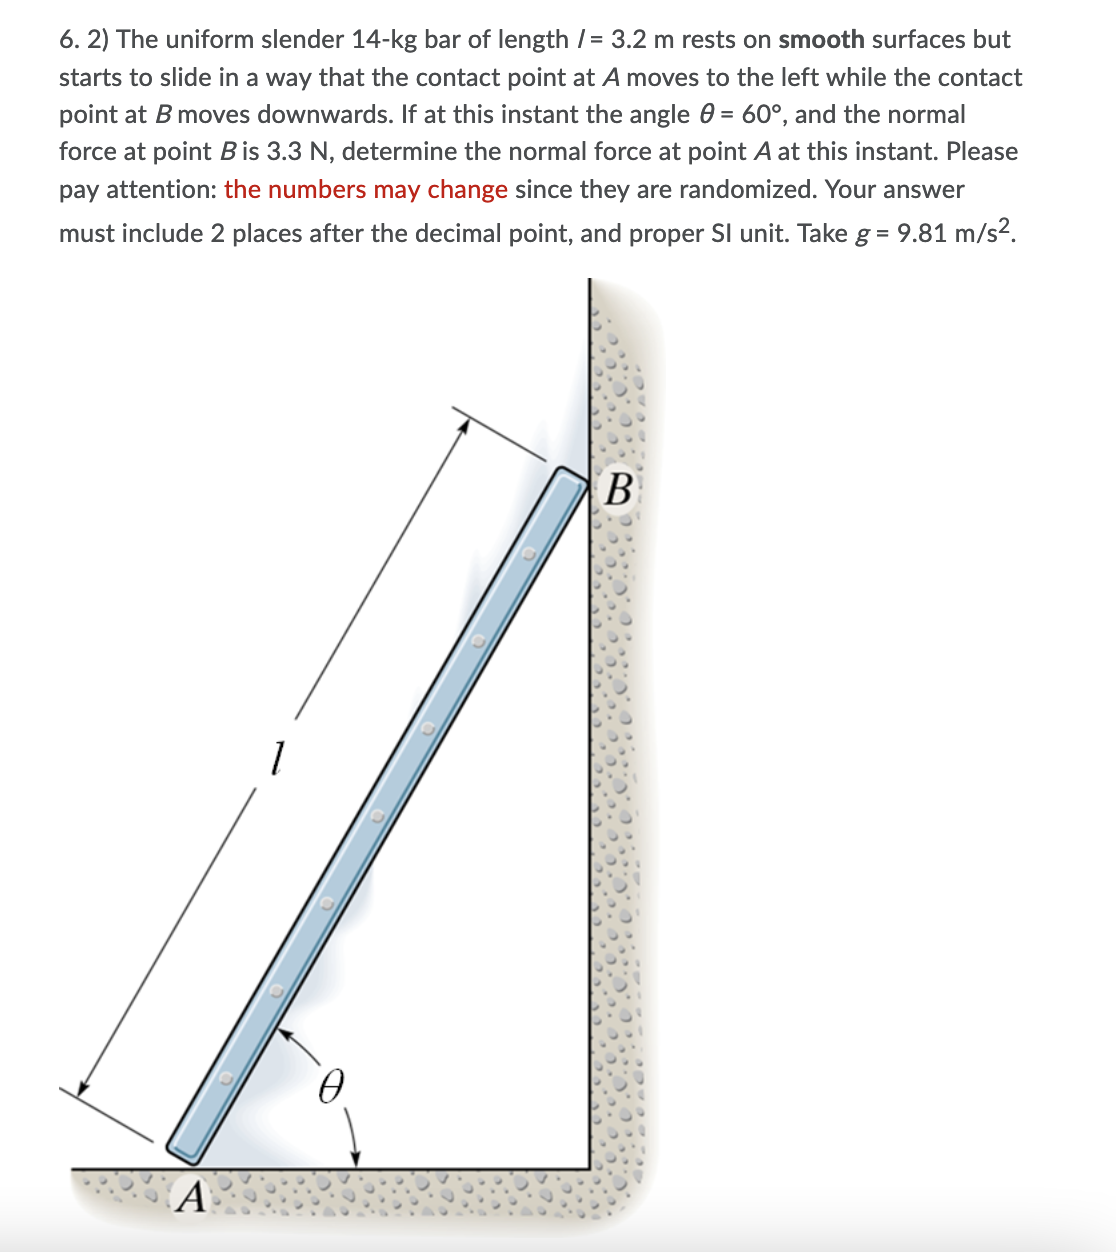 6. 2) The uniform slender 14-kg bar of length /= 3.2 m rests on smooth surfaces but
starts to slide in a way that the contact point at A moves to the left while the contact
point at B moves downwards. If at this instant the angle 0 = 60°, and the normal
force at point B is 3.3 N, determine the normal force at point A at this instant. Please
pay attention: the numbers may change since they are randomized. Your answer
must include 2 places after the decimal point, and proper Sl unit. Take g = 9.81 m/s?.
B
A
